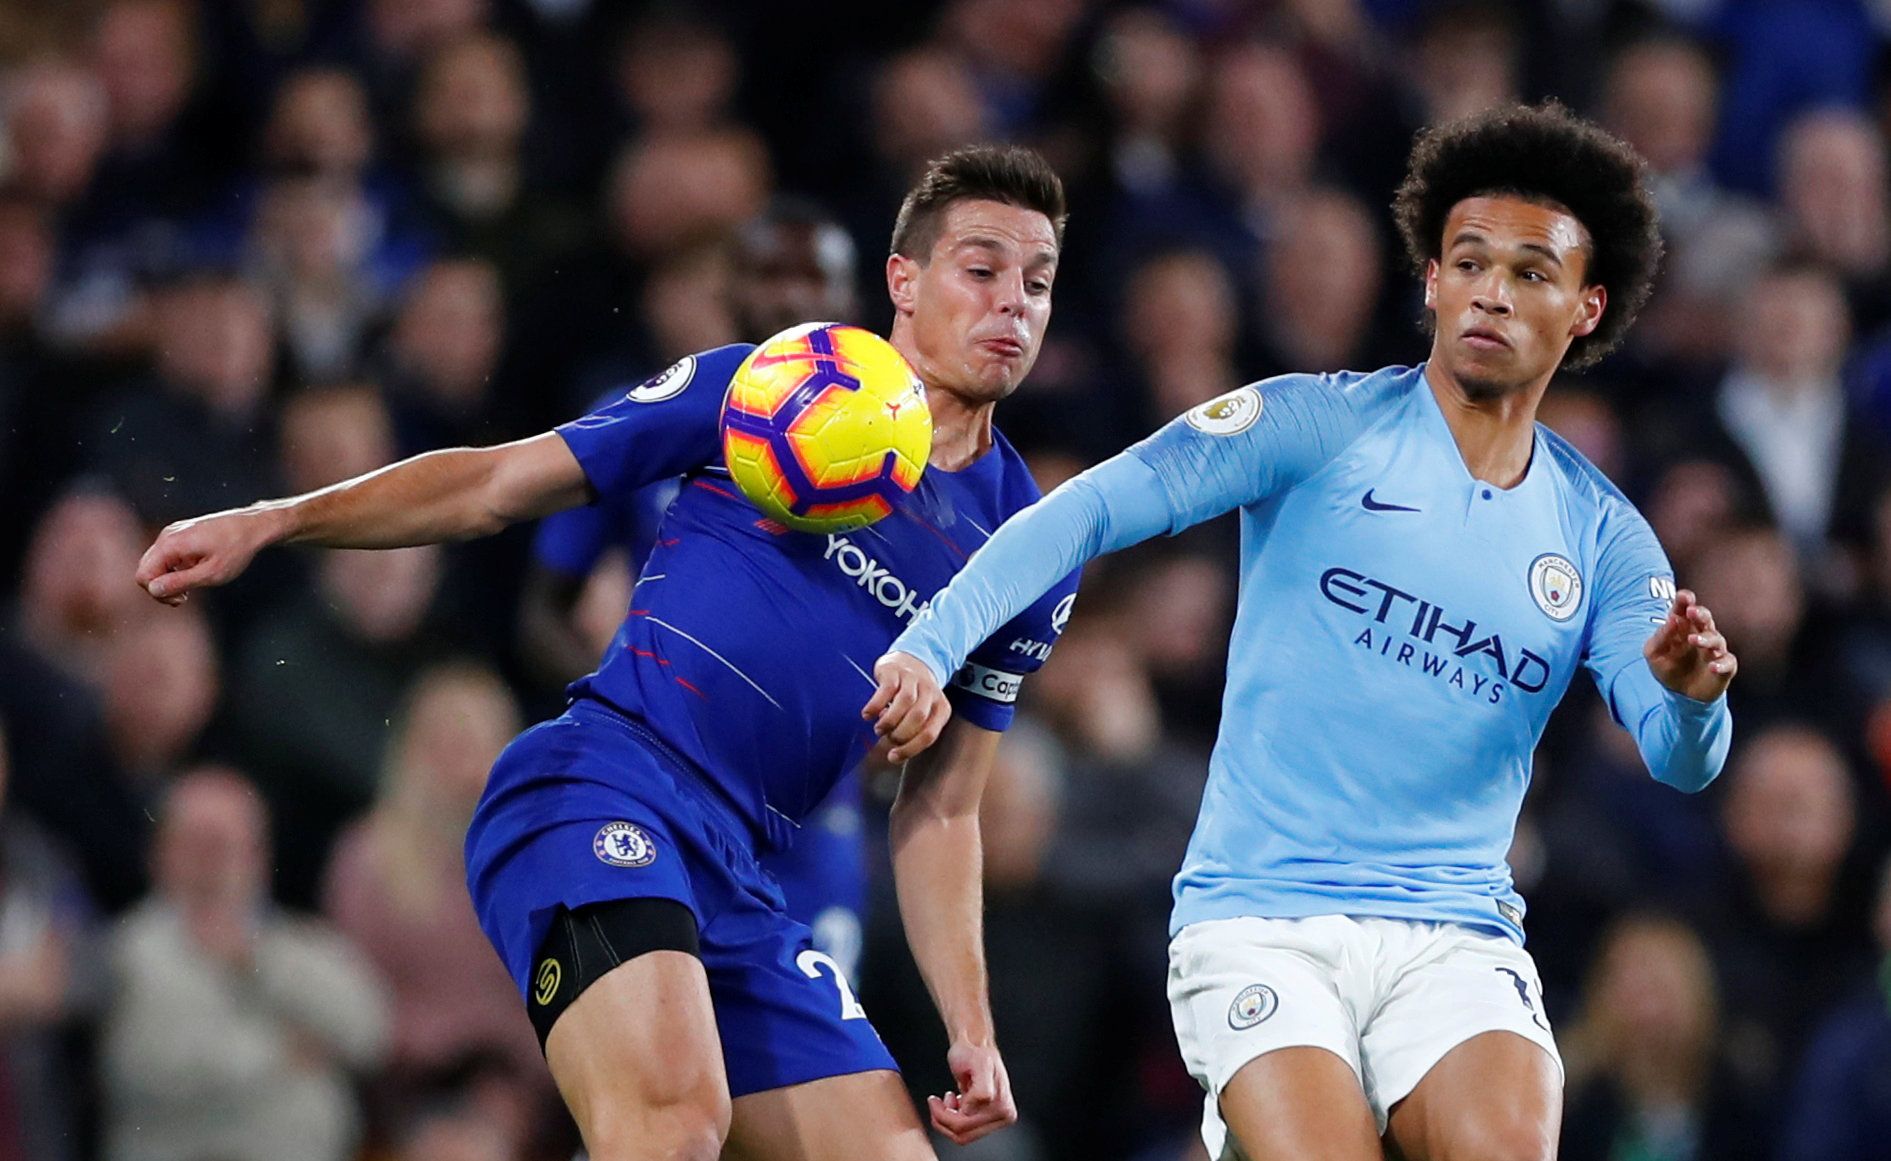 Soccer Football - Premier League - Chelsea v Manchester City - Stamford Bridge, London, Britain - December 8, 2018  Chelsea's Cesar Azpilicueta in action with Manchester City's Leroy Sane      REUTERS/Eddie Keogh  EDITORIAL USE ONLY. No use with unauthorized audio, video, data, fixture lists, club/league logos or 